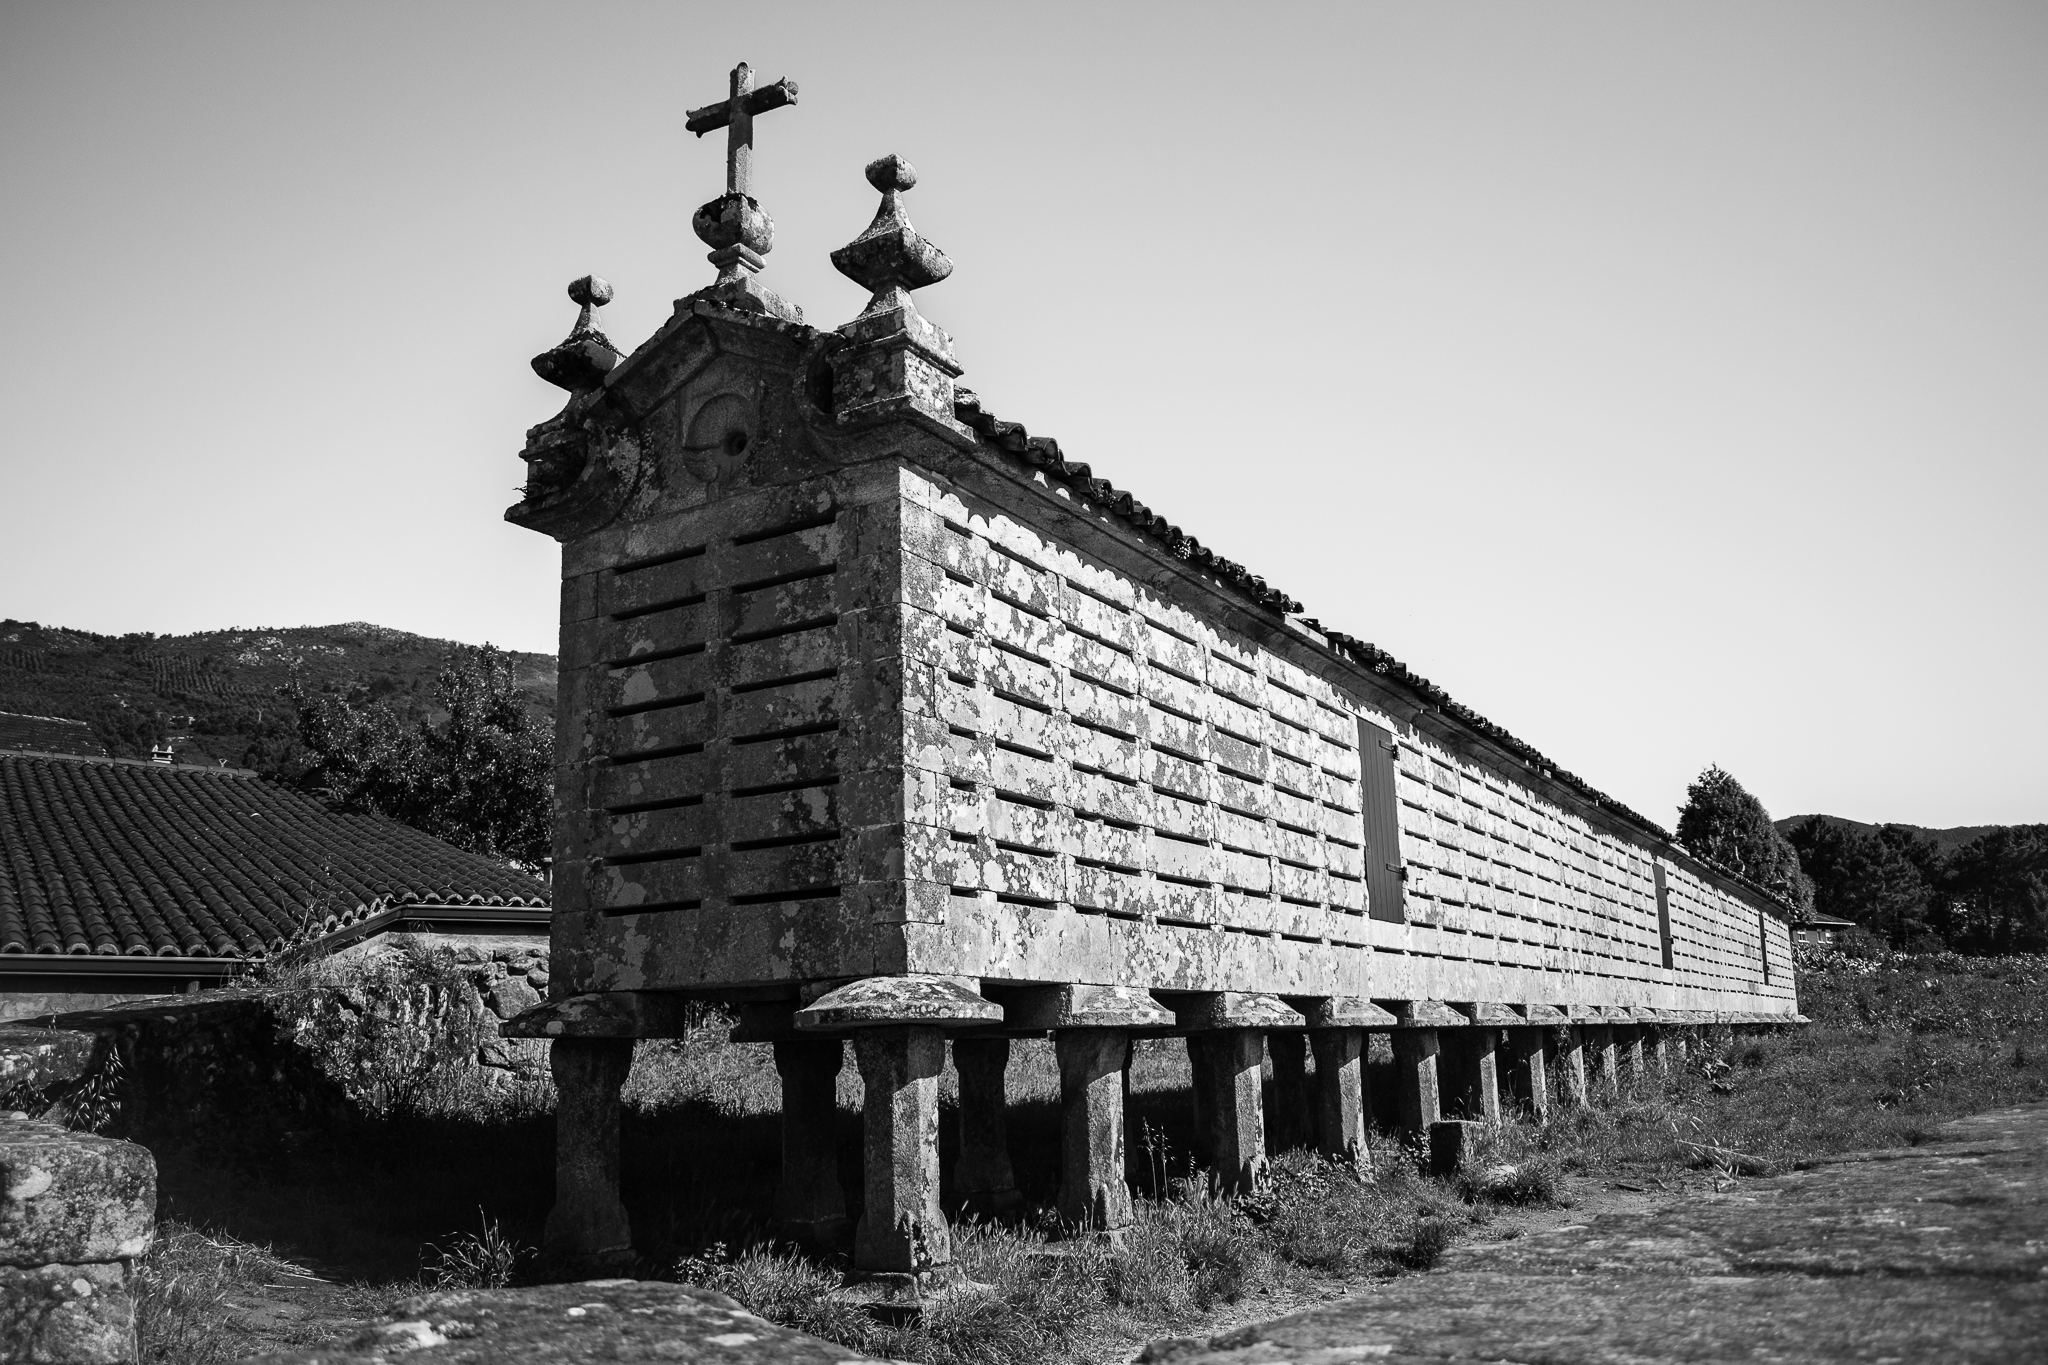 The hórreo of Carnota is, together with the one of Lira and Araño, one of the largest in Galicia. Built in the 18. century and declared National Monument, it has a total length of more than 34 meters. The role of the hórreos was to separate the food from the ground to distance it from the animals and improve its conservation. Normally, the largest hórreos were located near a church, which kept 10% of the crops through a tax known as the tithe.